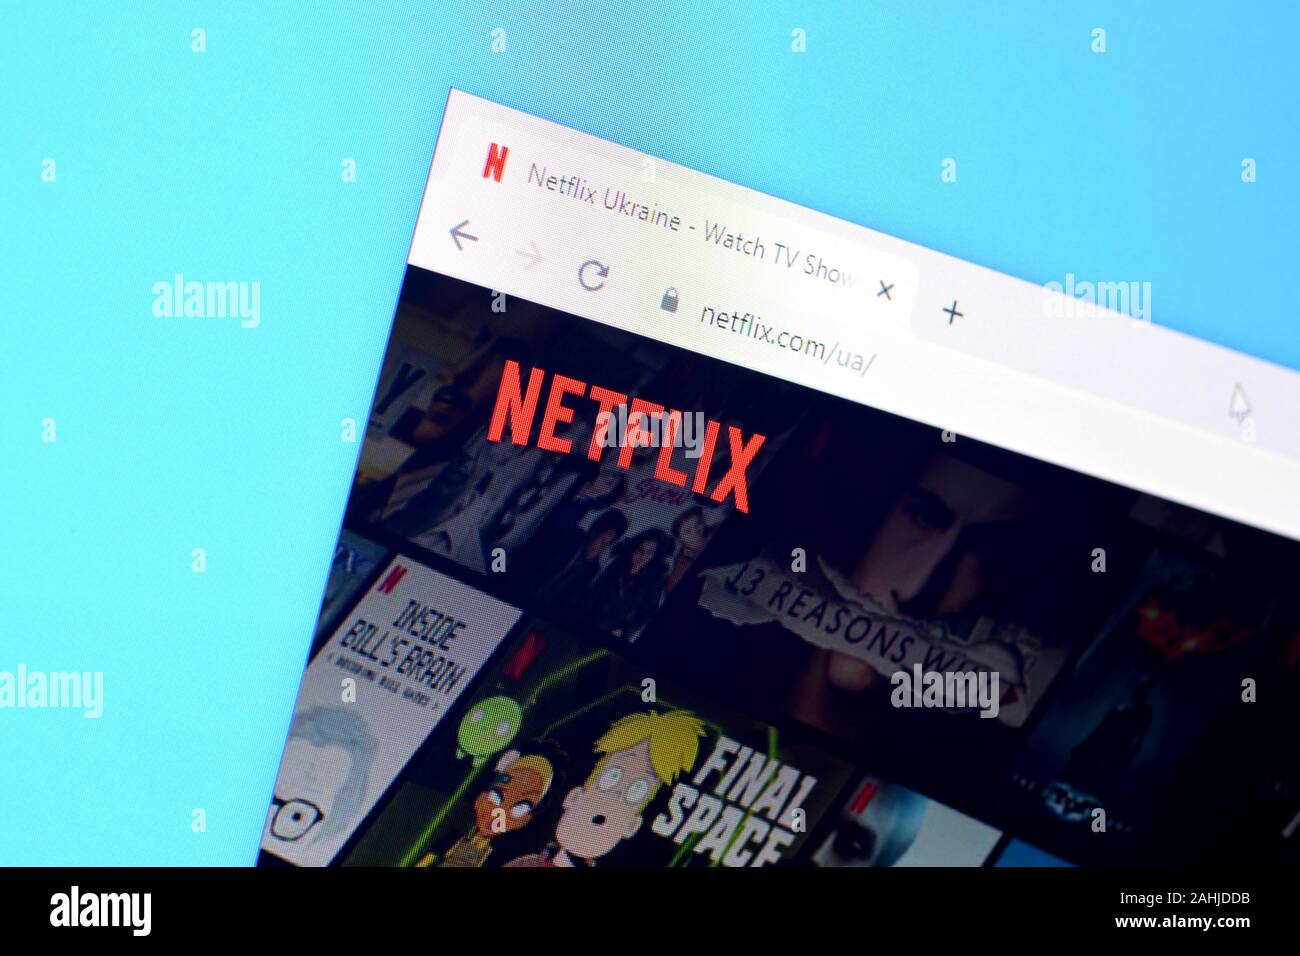 NY, USA - DECEMBER 16, 2019: Homepage of netflix website on the display of PC, url - netflix.com. Stock Photo